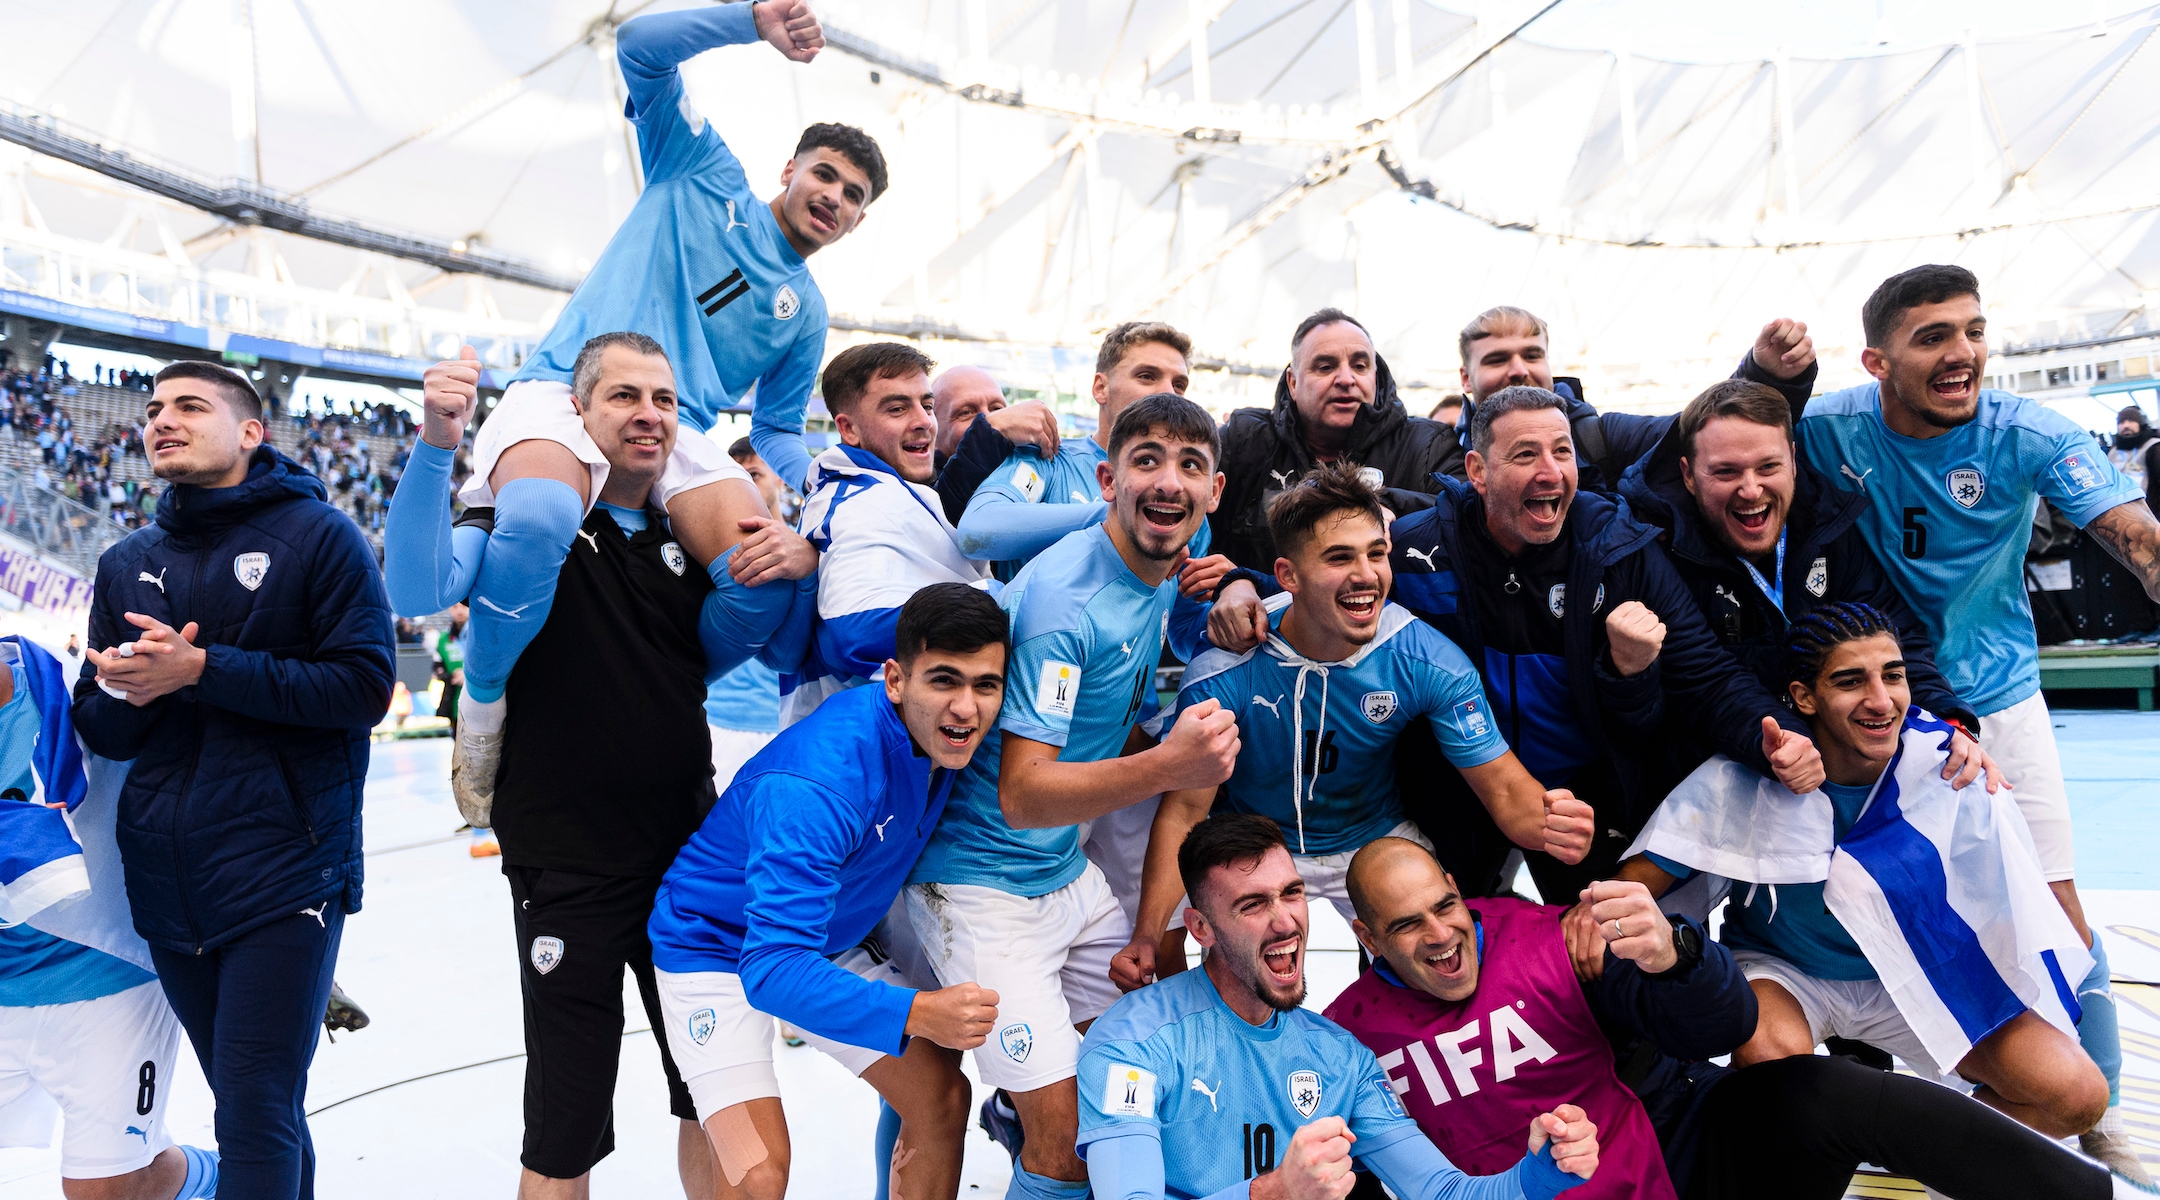 Israel’s under-20 men’s soccer teams celebrates winning third place at the FIFA U-20 World Cup in La Plata, Argentina, June 11, 2023. (Marcio Machado/Eurasia Sport Images/Getty Images)